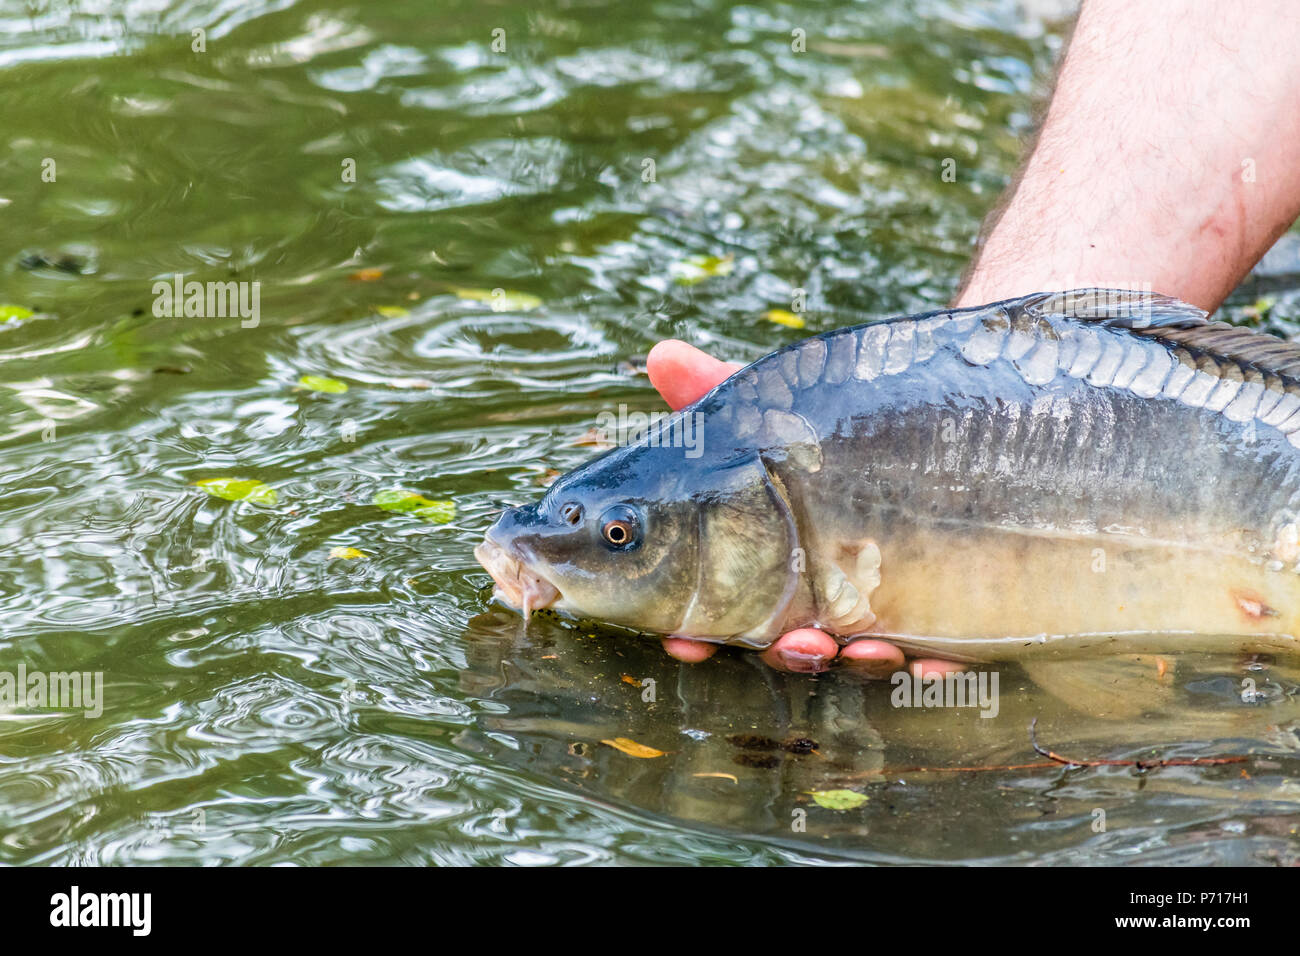 Fisherman releasing living fish (common carp) back into the water after showing it up. Also known as European Carp or Cyprinus carpio. Stock Photo